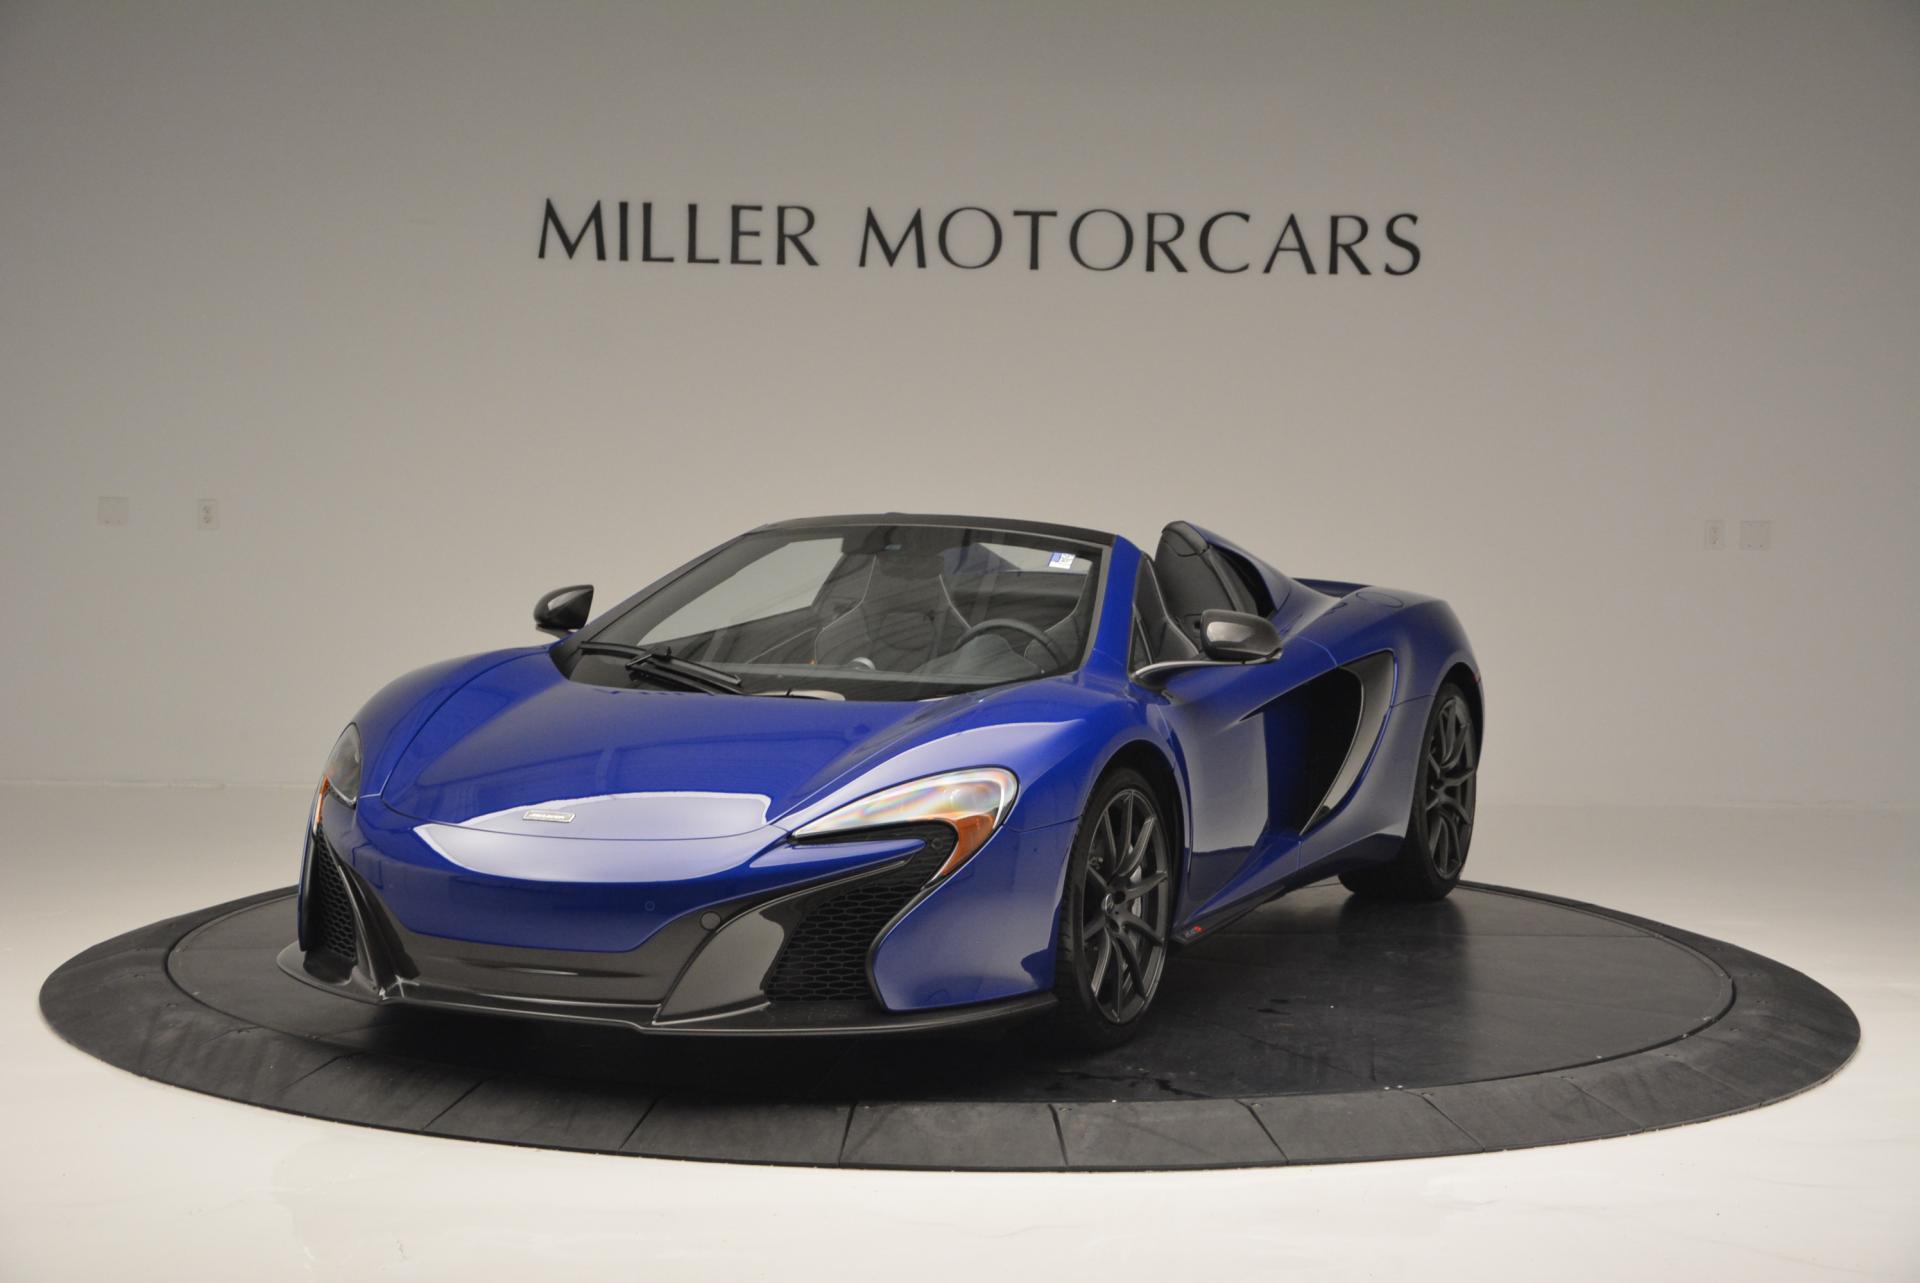 Used 2016 McLaren 650S Spider for sale Sold at Bentley Greenwich in Greenwich CT 06830 1